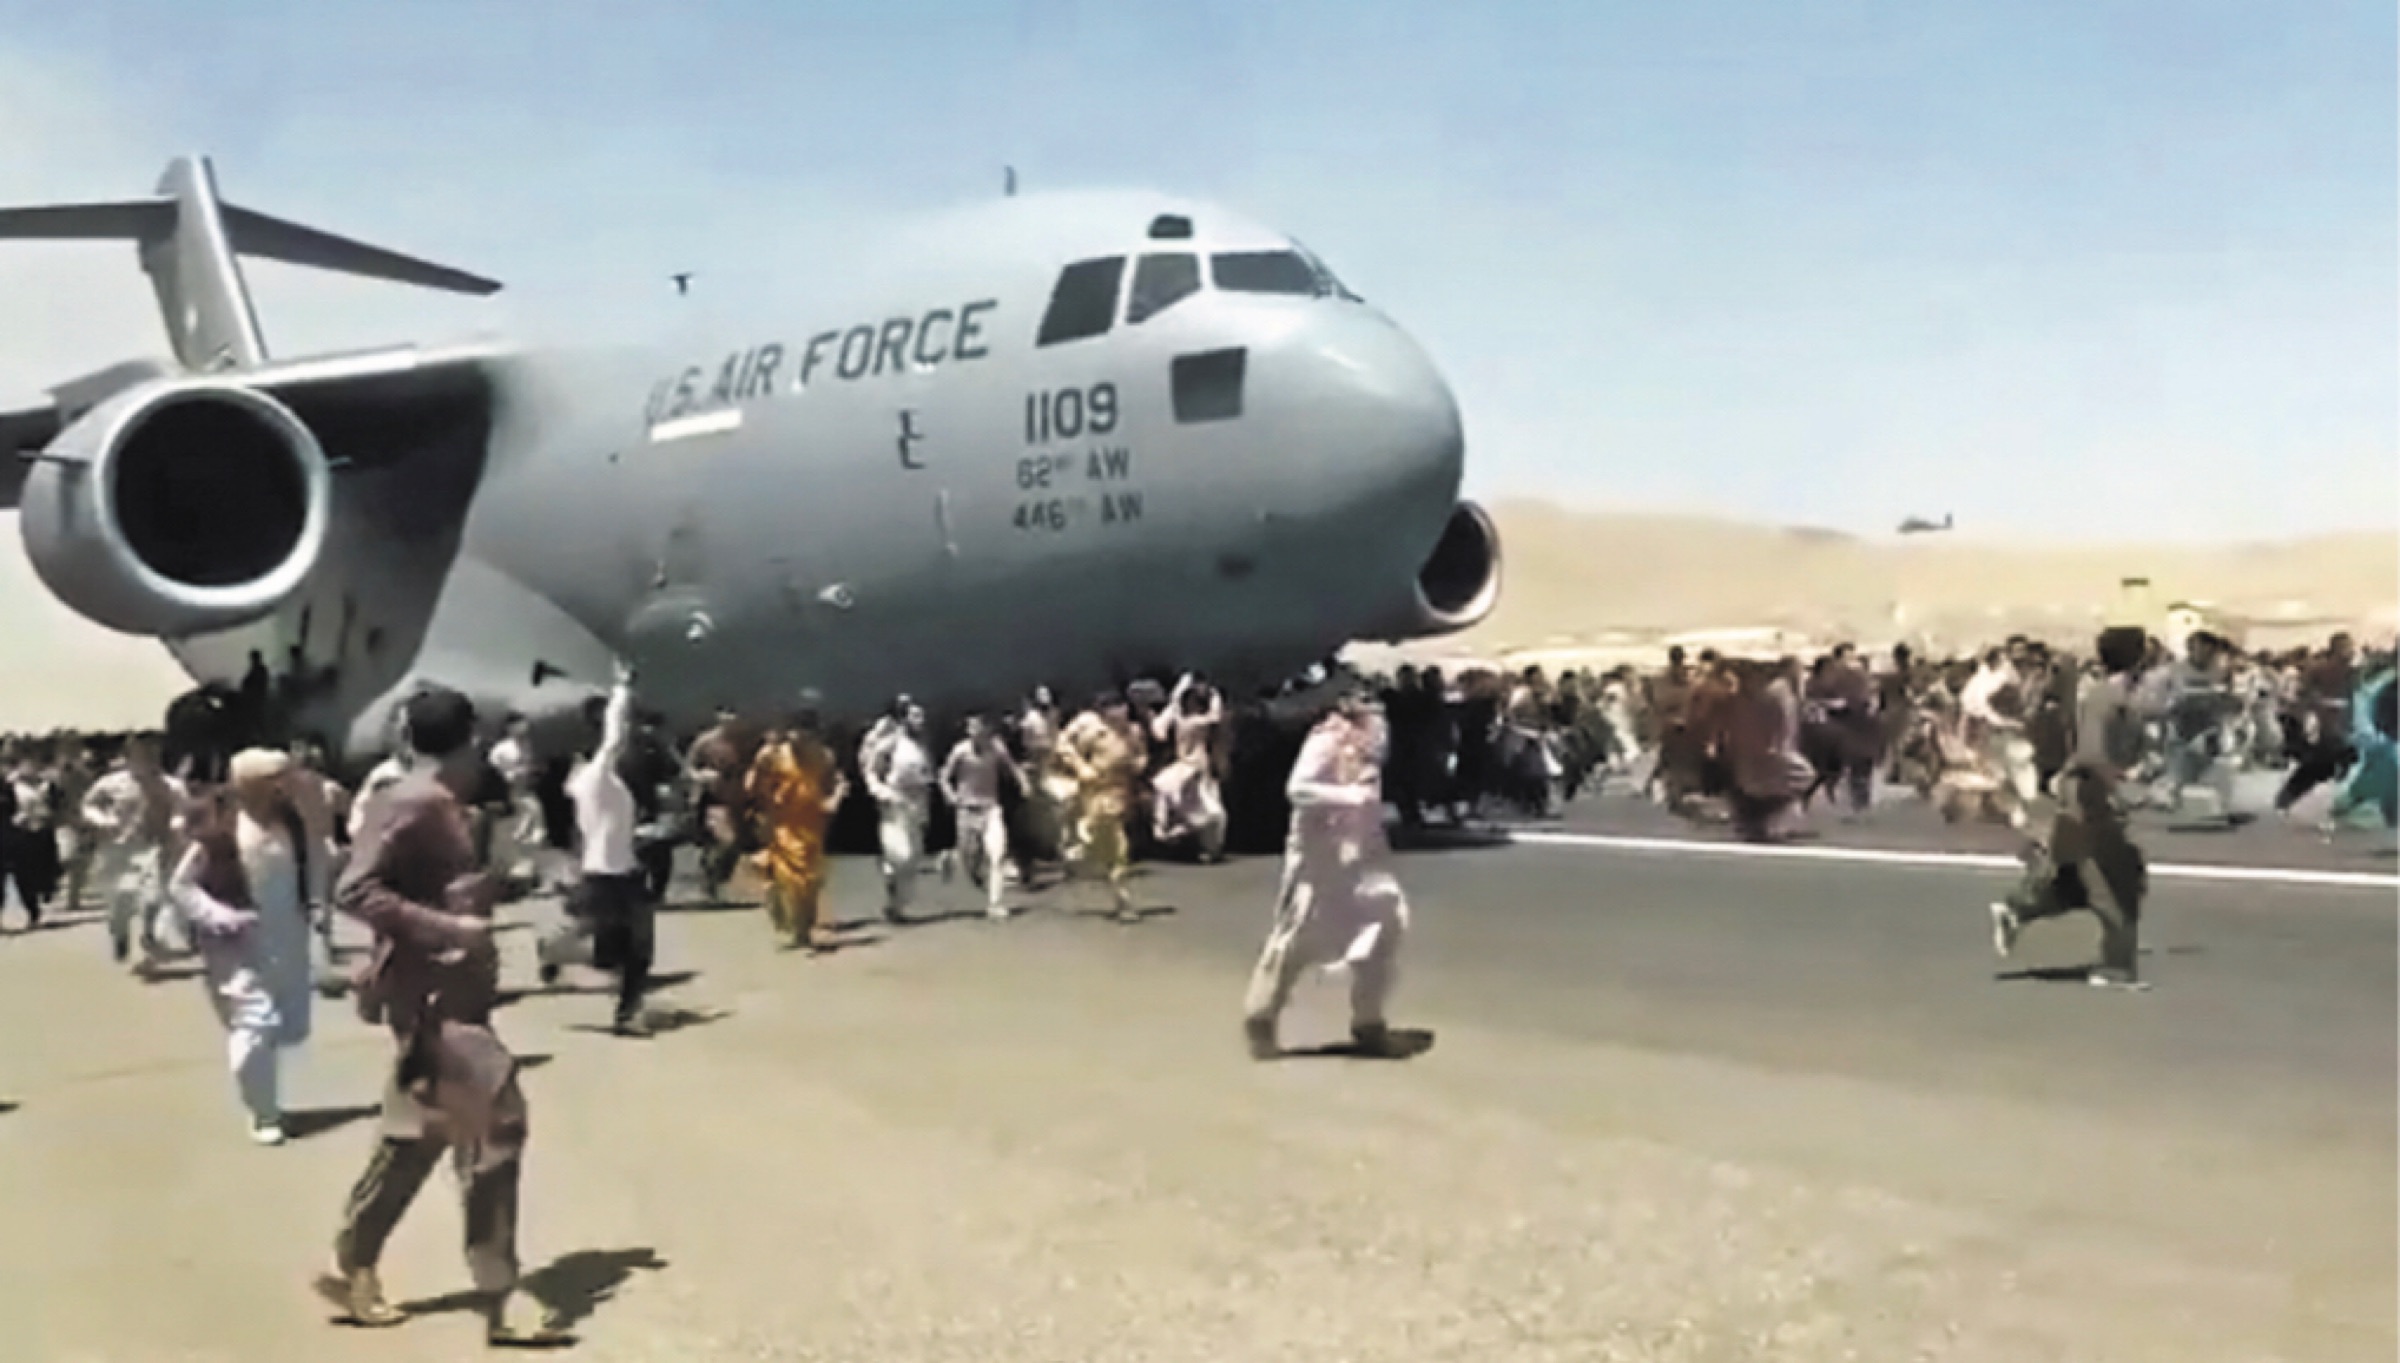 Chatting the Pictures: On That US Transport Plane Swarmed By Afghans on a Kabul Runway